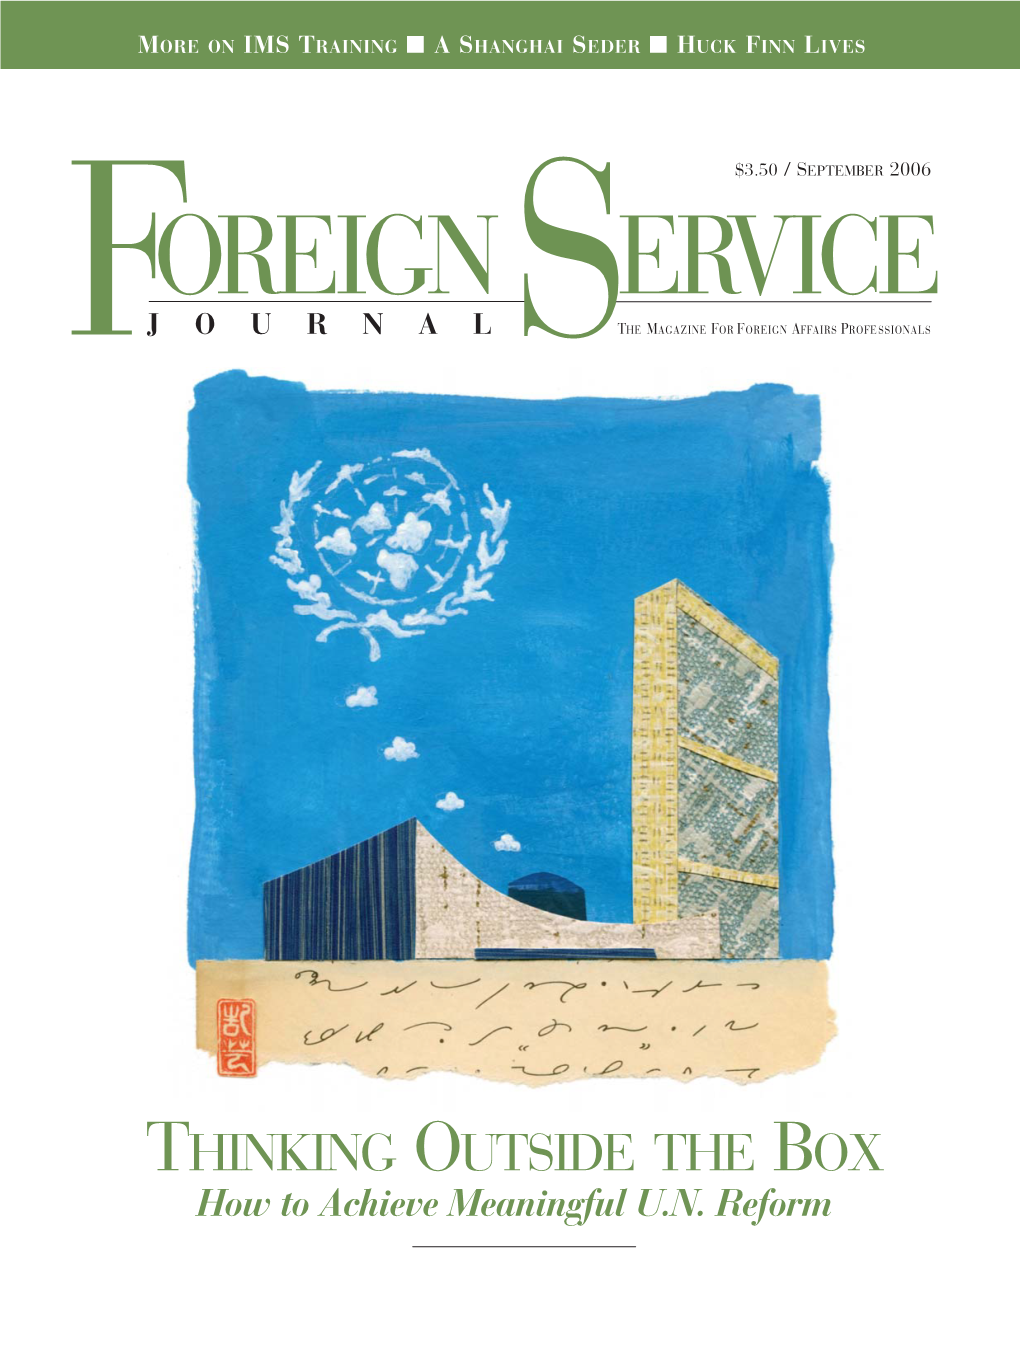 The Foreign Service Journal, September 2006